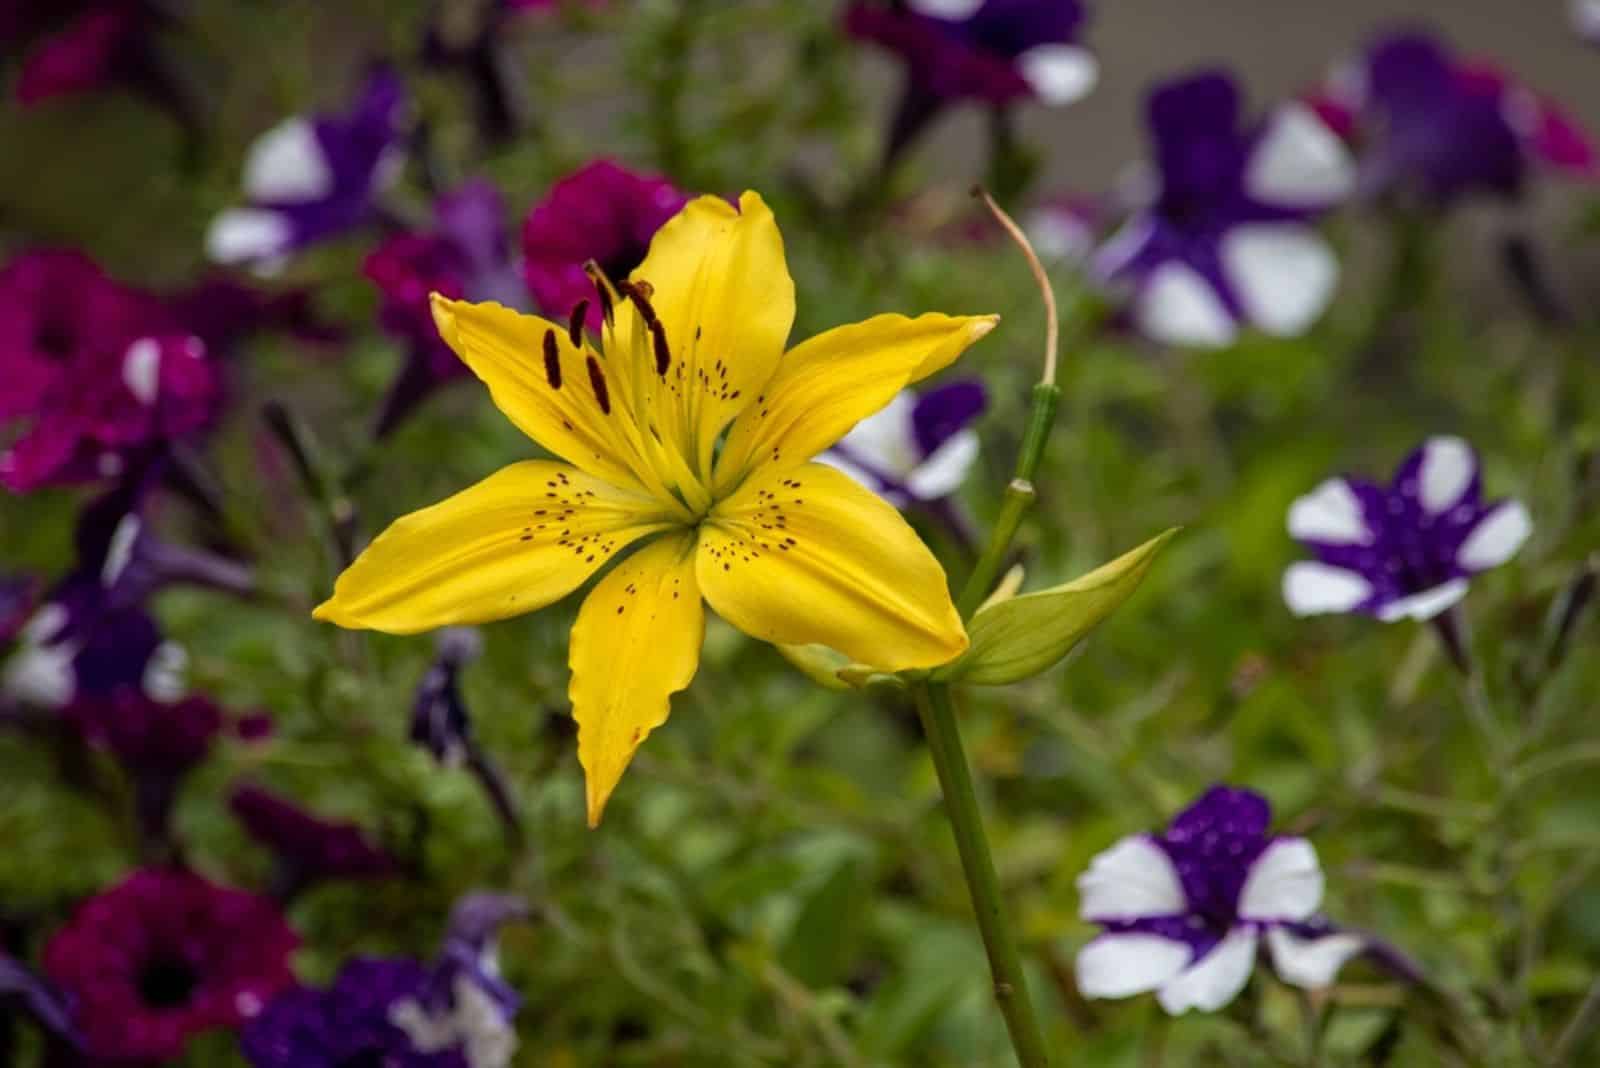 beautiful yellow Lilly surrounded by purple and white flowers